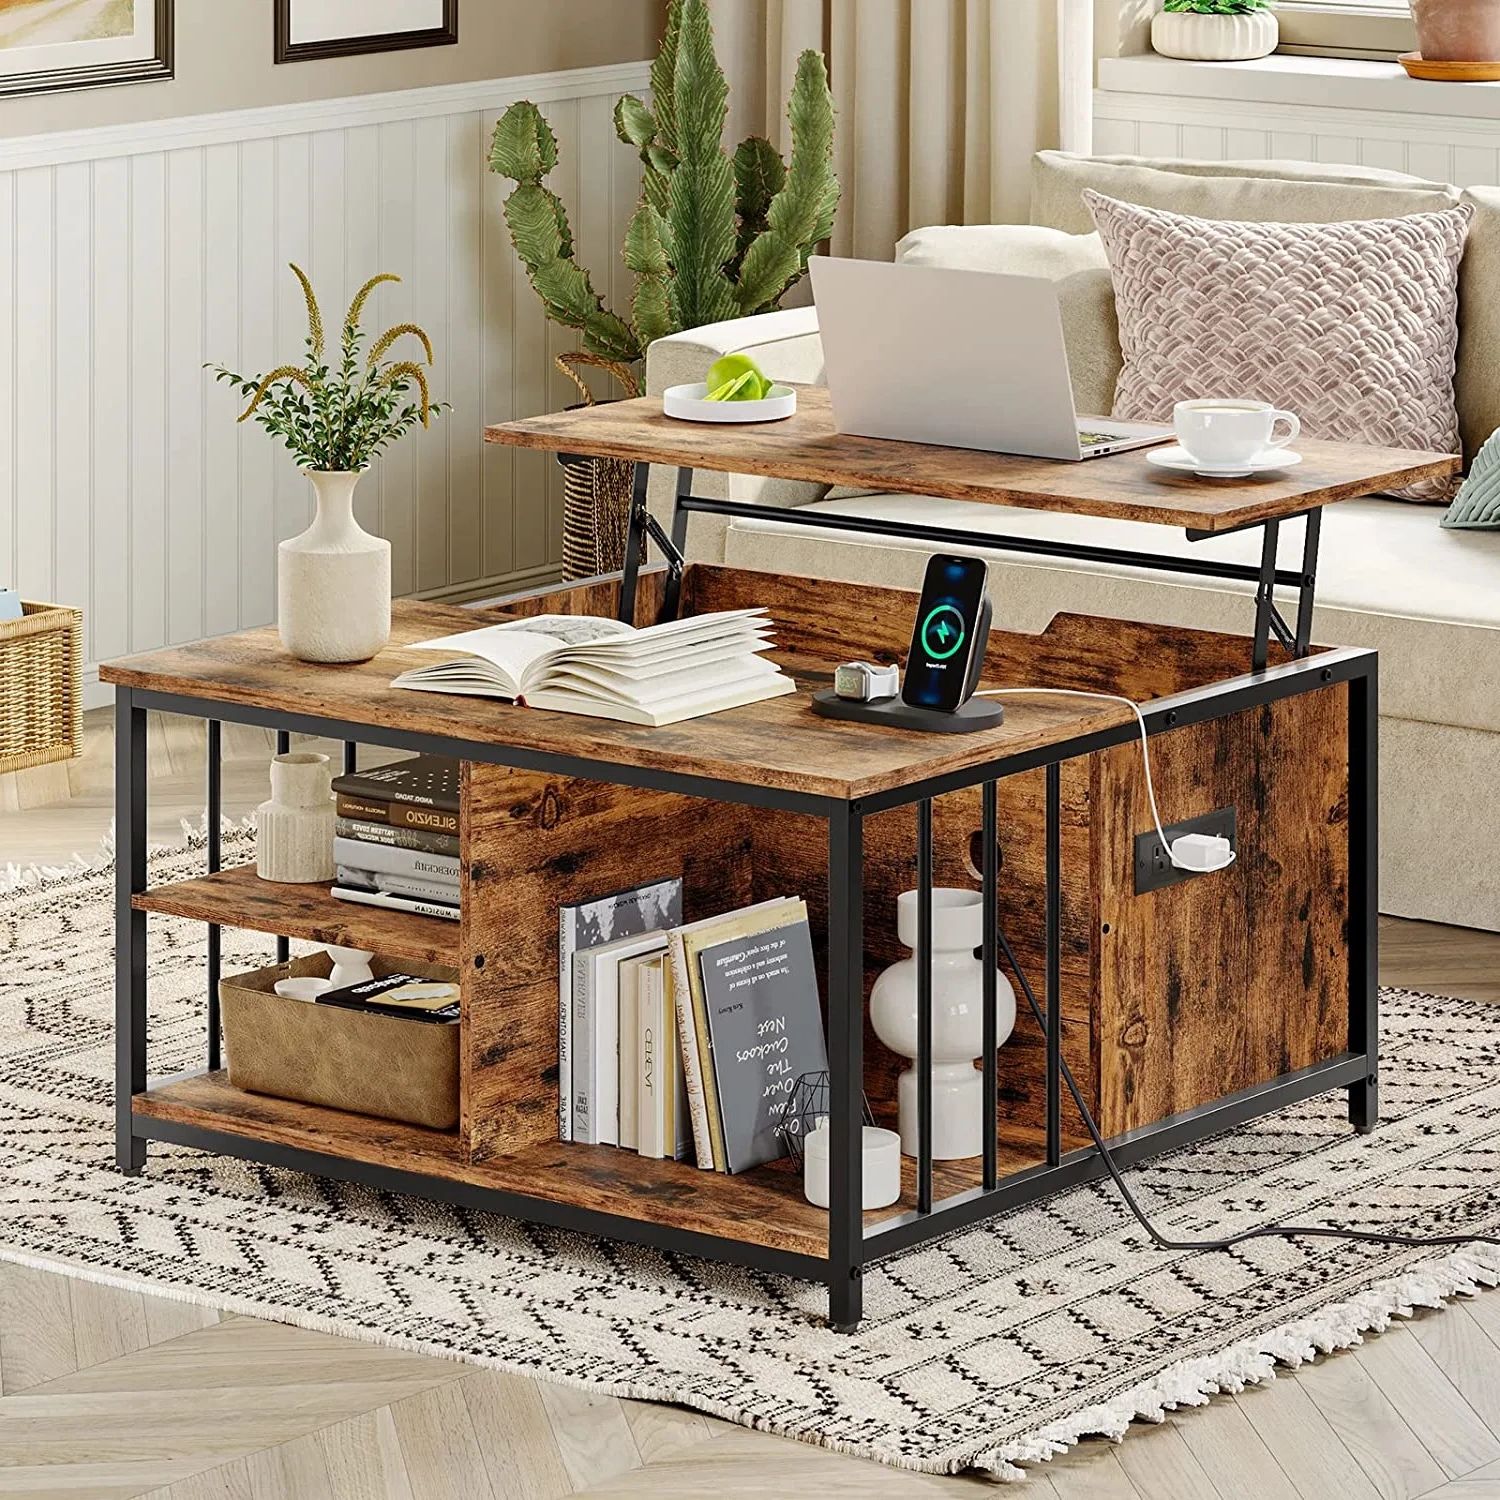 Fashionable Lift Top Coffee Tables With Hidden Storage Compartments With Farmhouse Square Lift Top Coffee Table With Storage And Hidden Compartment  Charging Station – China Coffee Table, Lift Top Coffee Table (View 10 of 10)